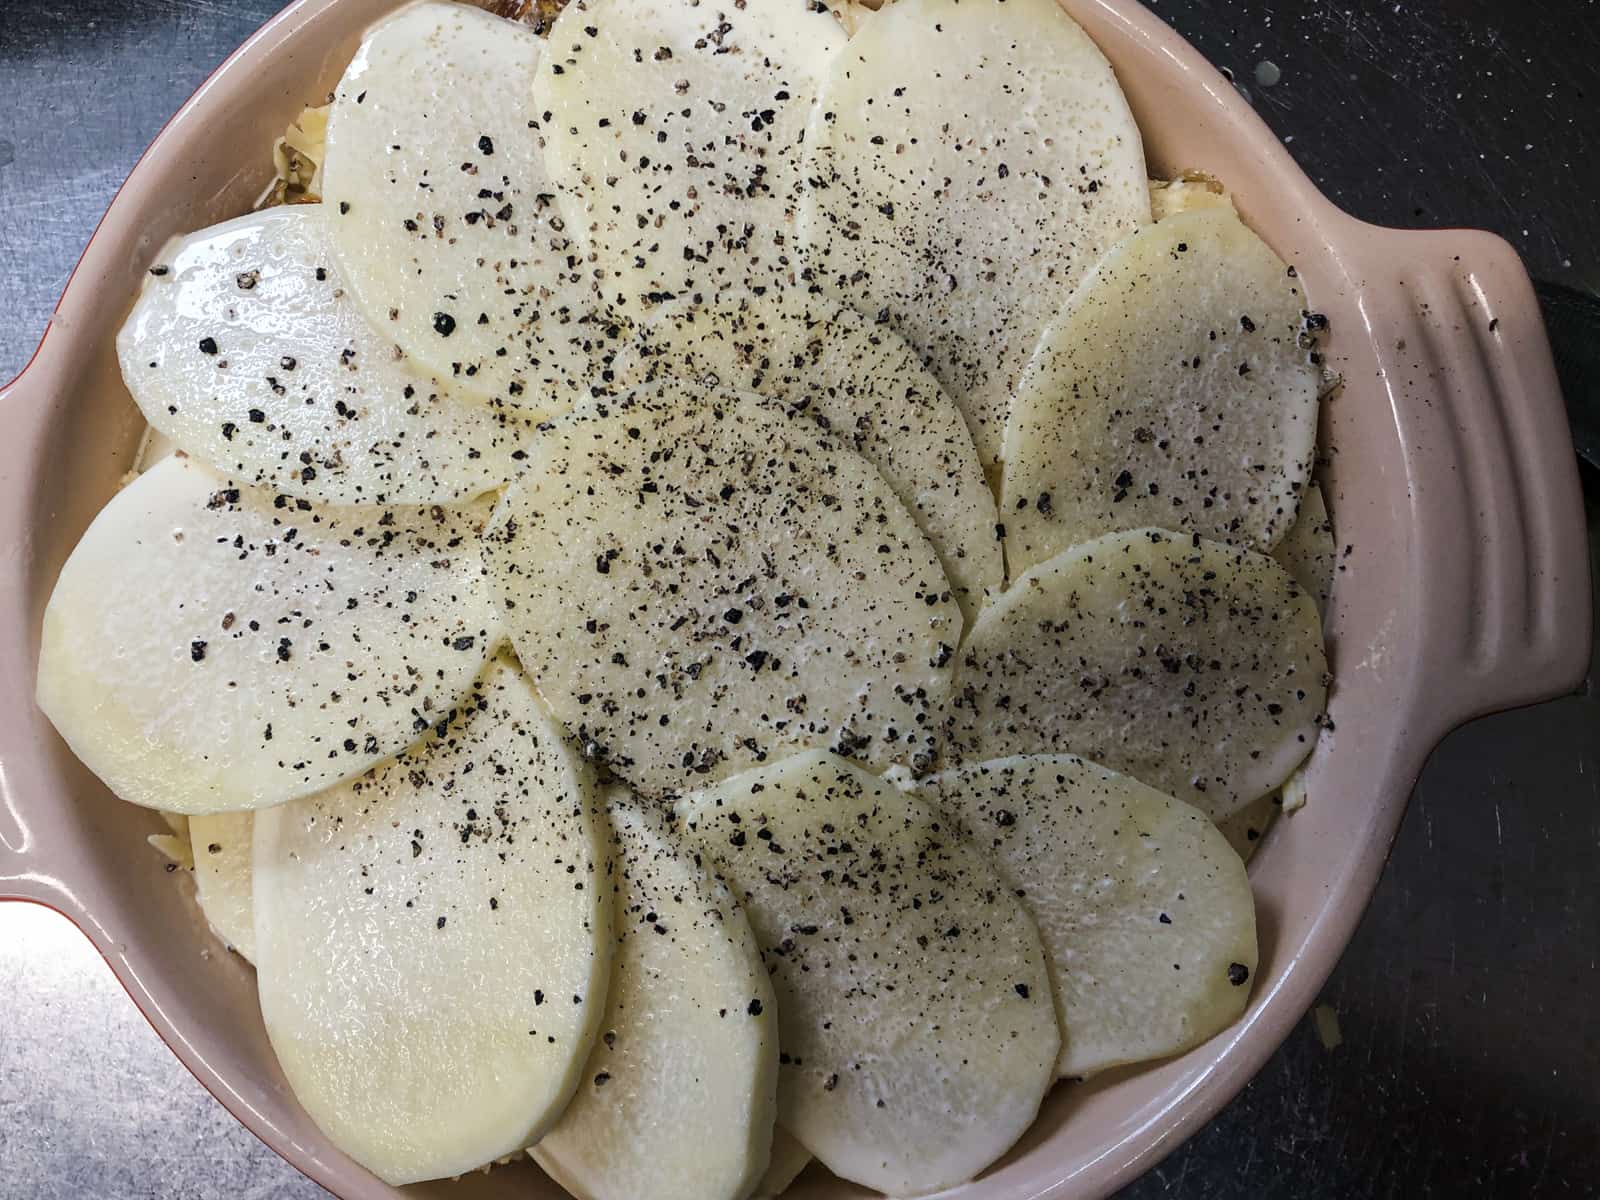 A spiral layer of potatoes to finish off a gratin bake, before being put into the oven.